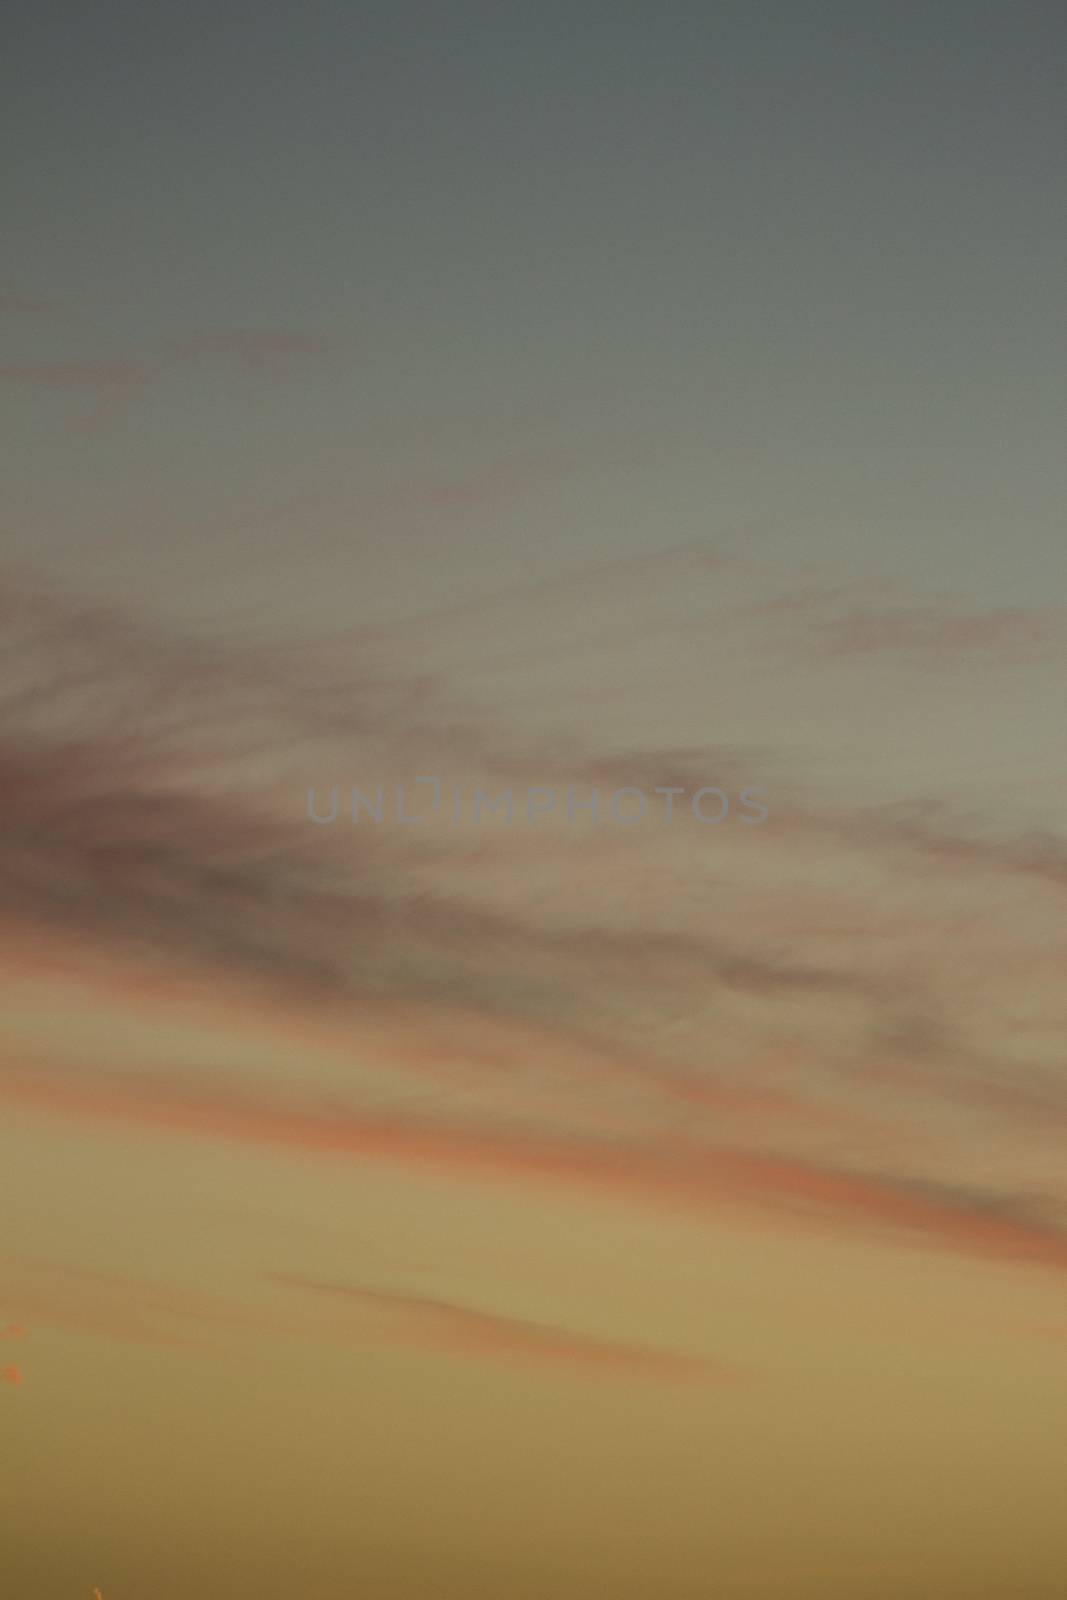 Airplane in sky with clouds in blue and pink purple sunset evening pastel colors photo shot from ground.